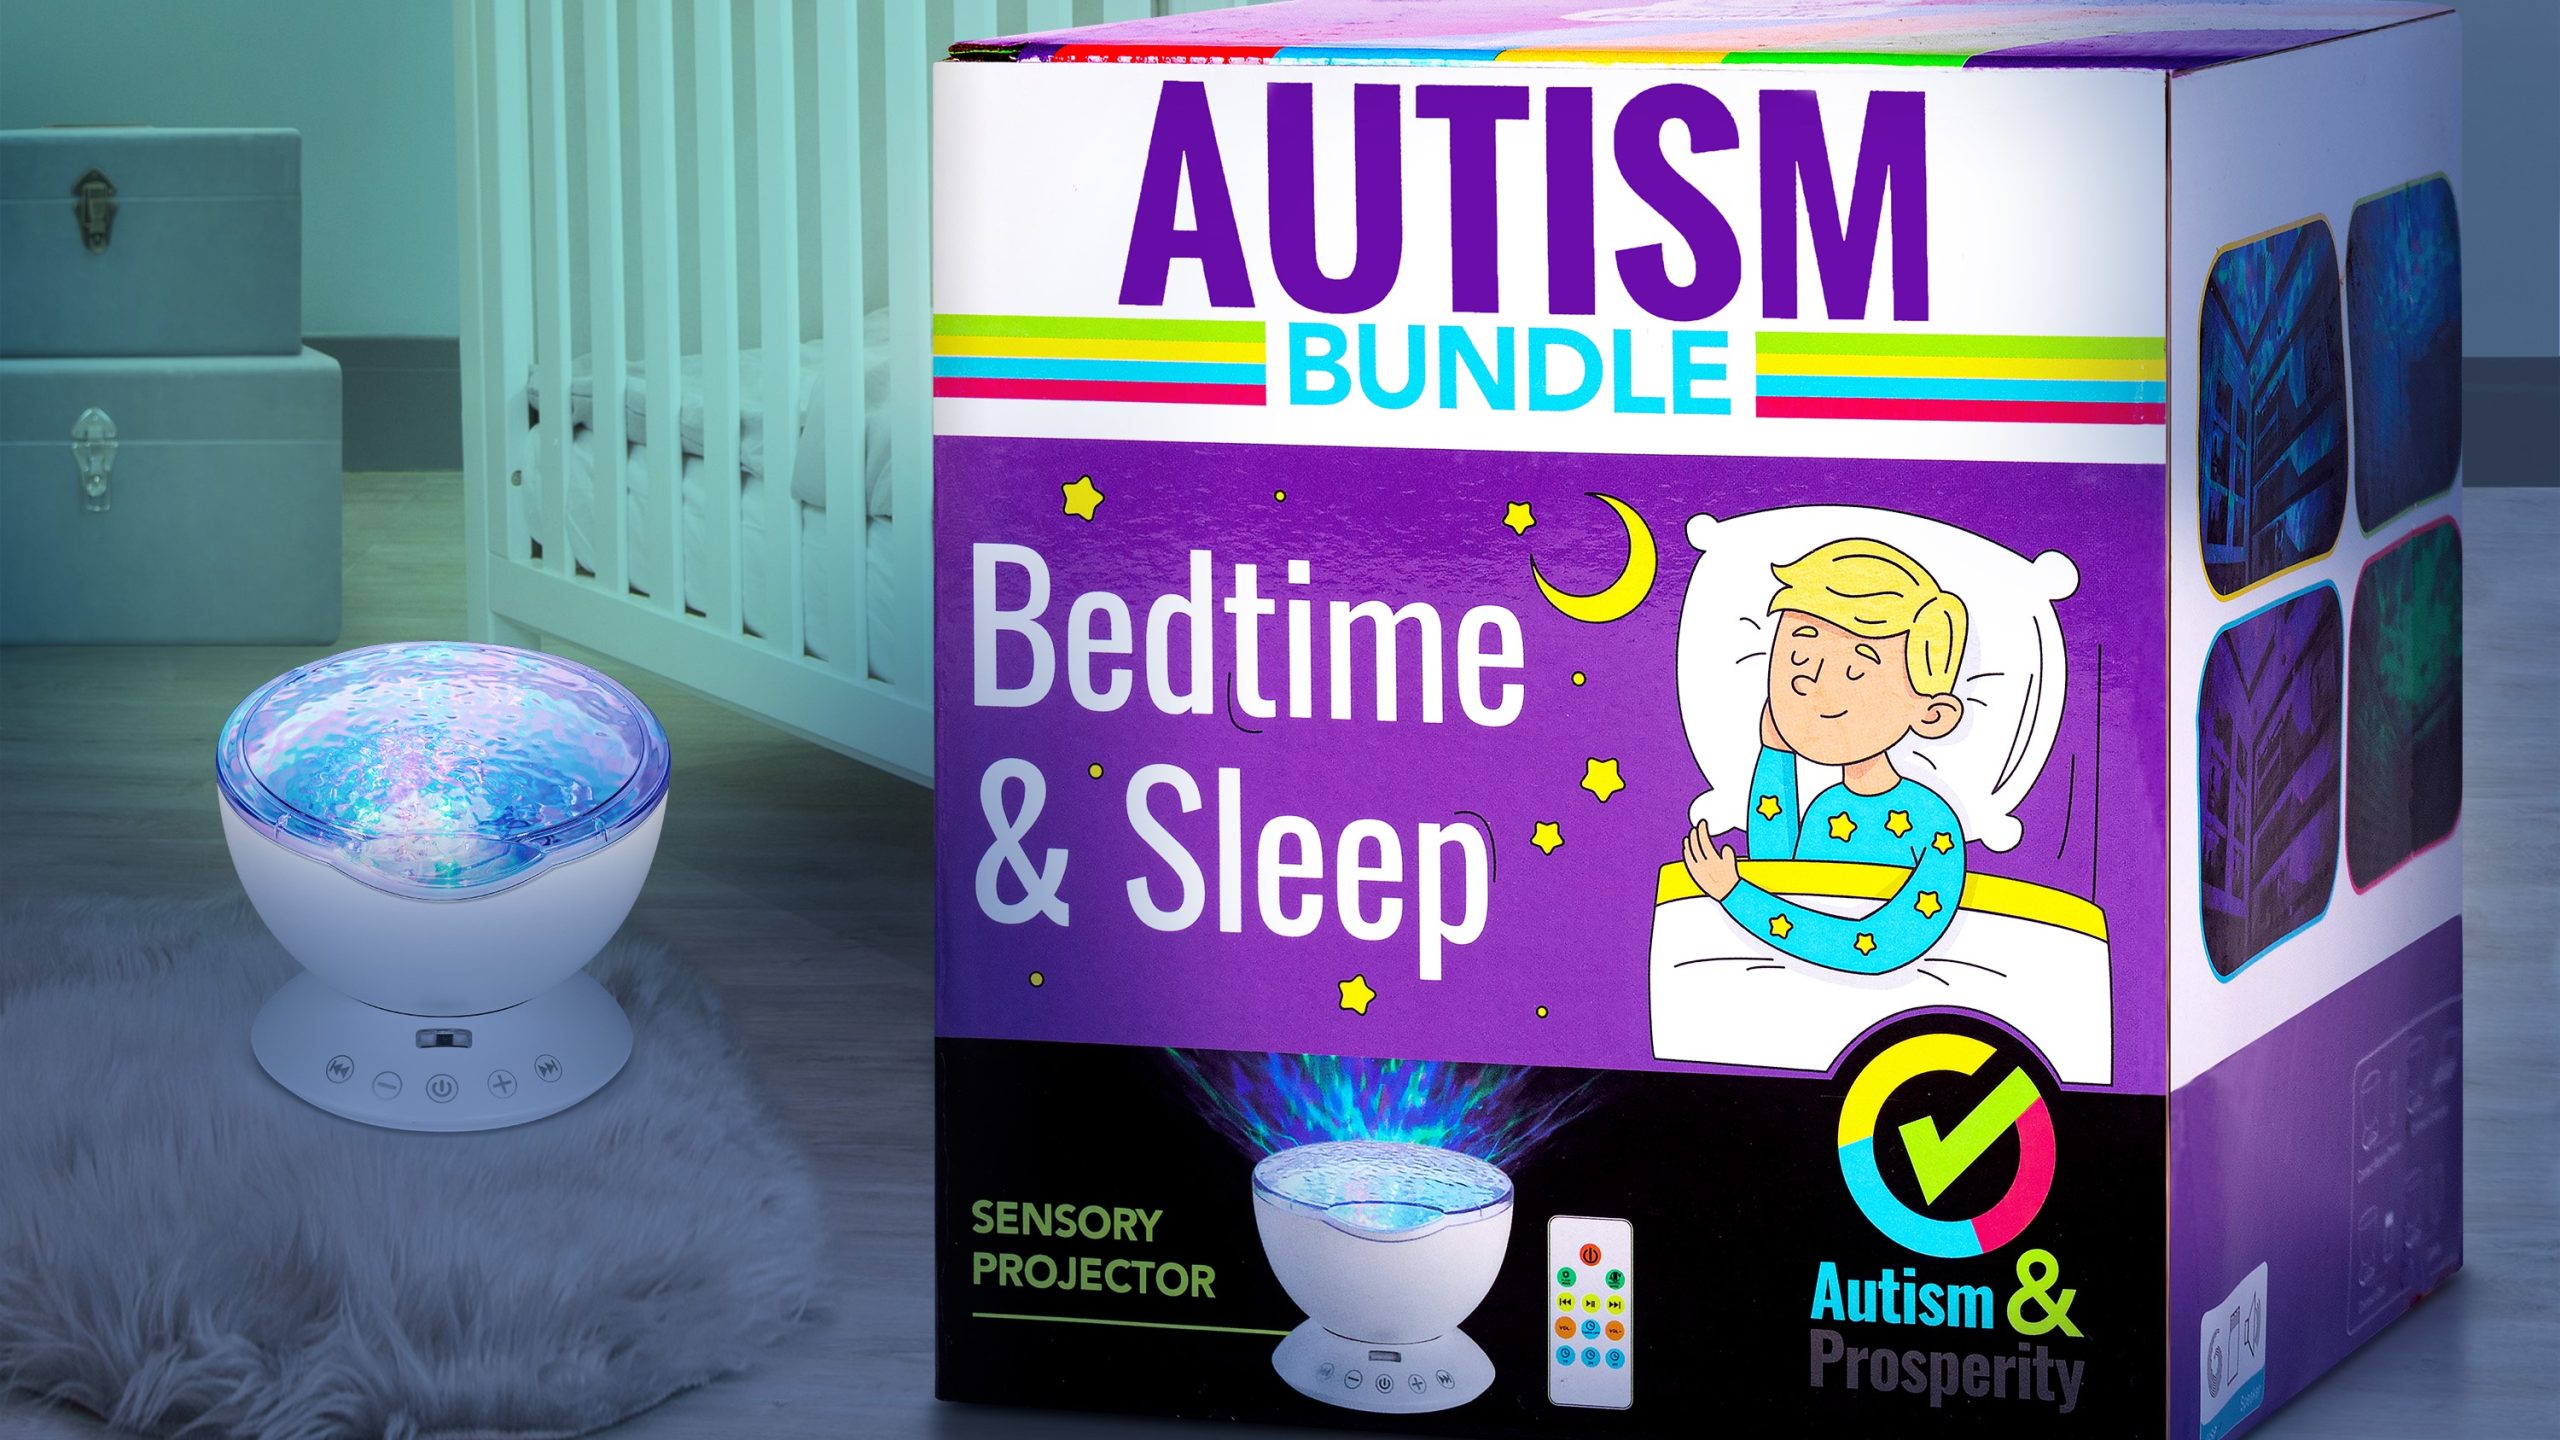 Autism & Prosperity helps people struggling with autism improve their lives with their affordable products